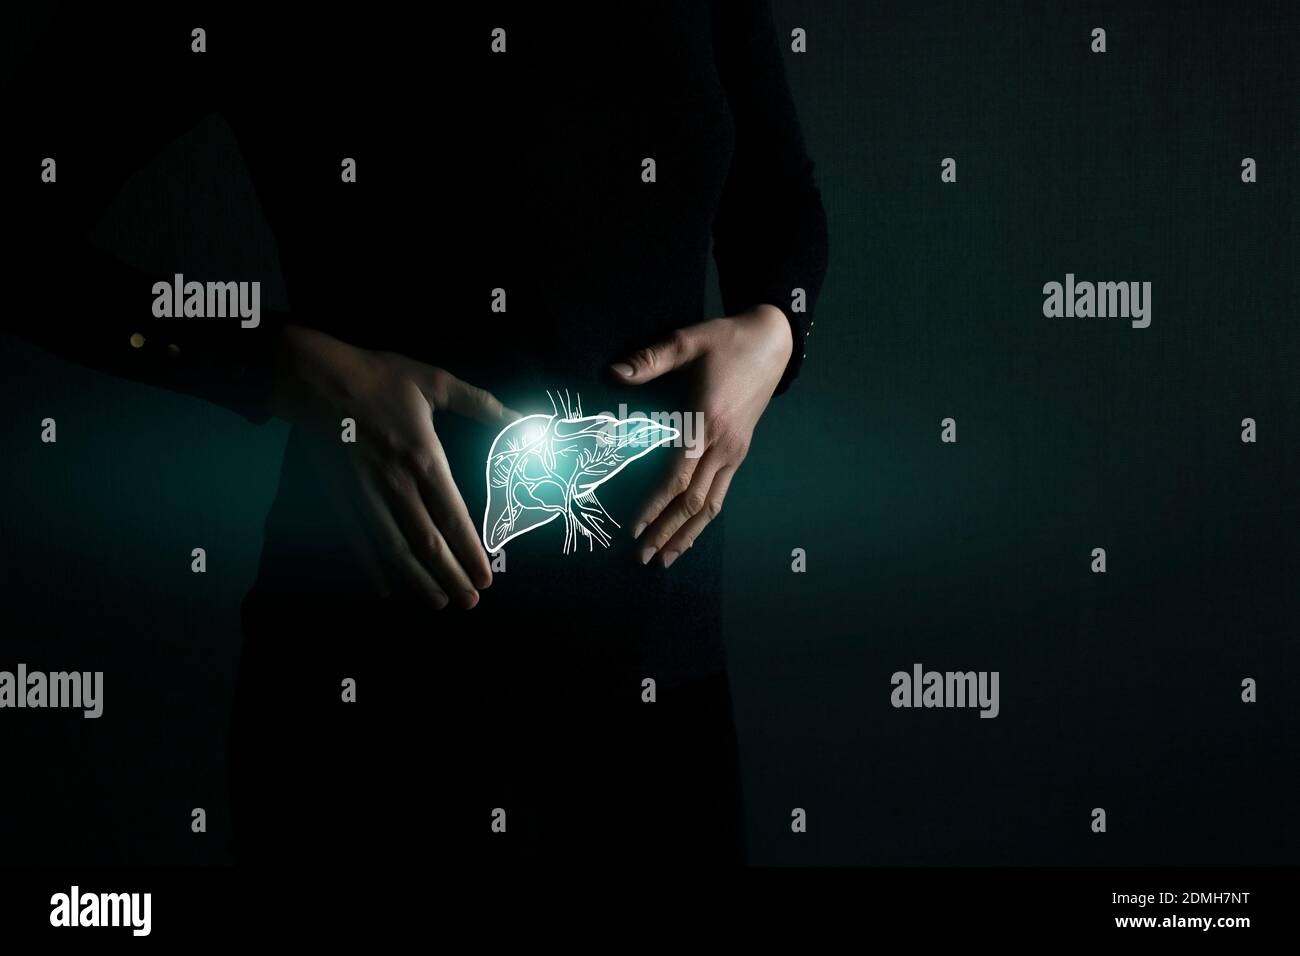 Illustration of liver detox with highlighted organ and contrast hands on dark background. Low key photo with copy space toned in dark green colors. Stock Photo